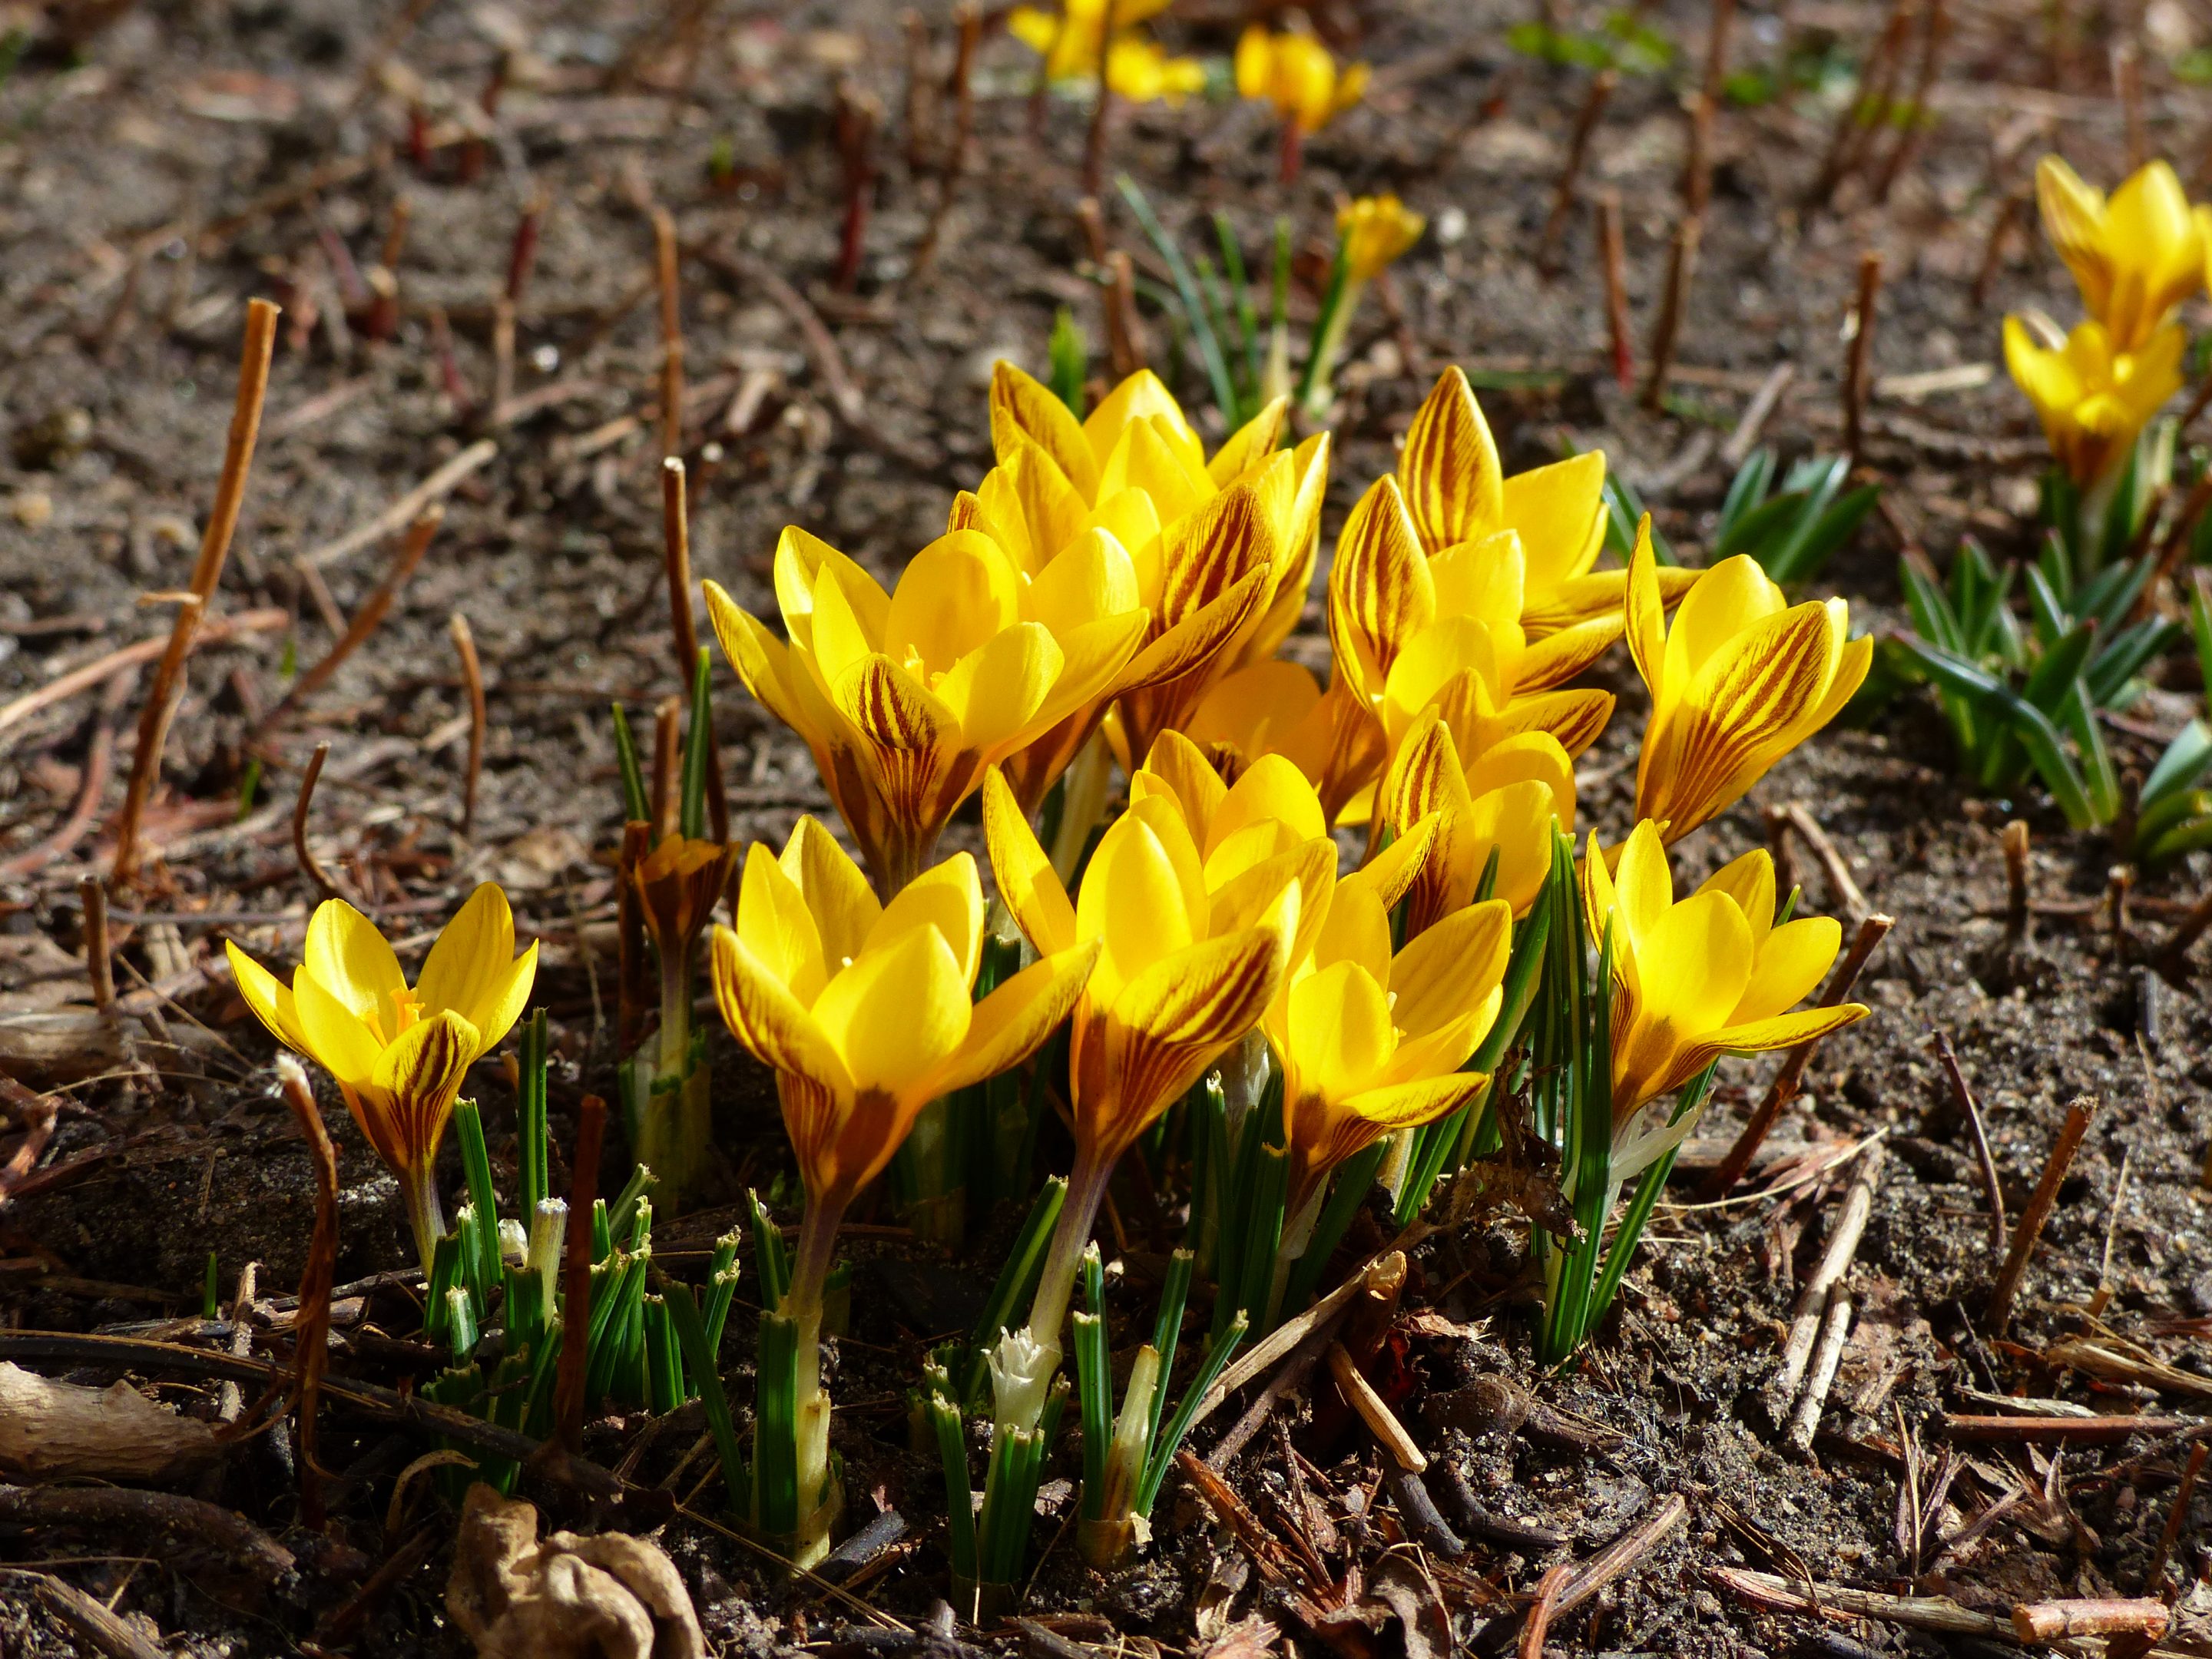 A small cluster of flowering yellow crocuses with brown stripes